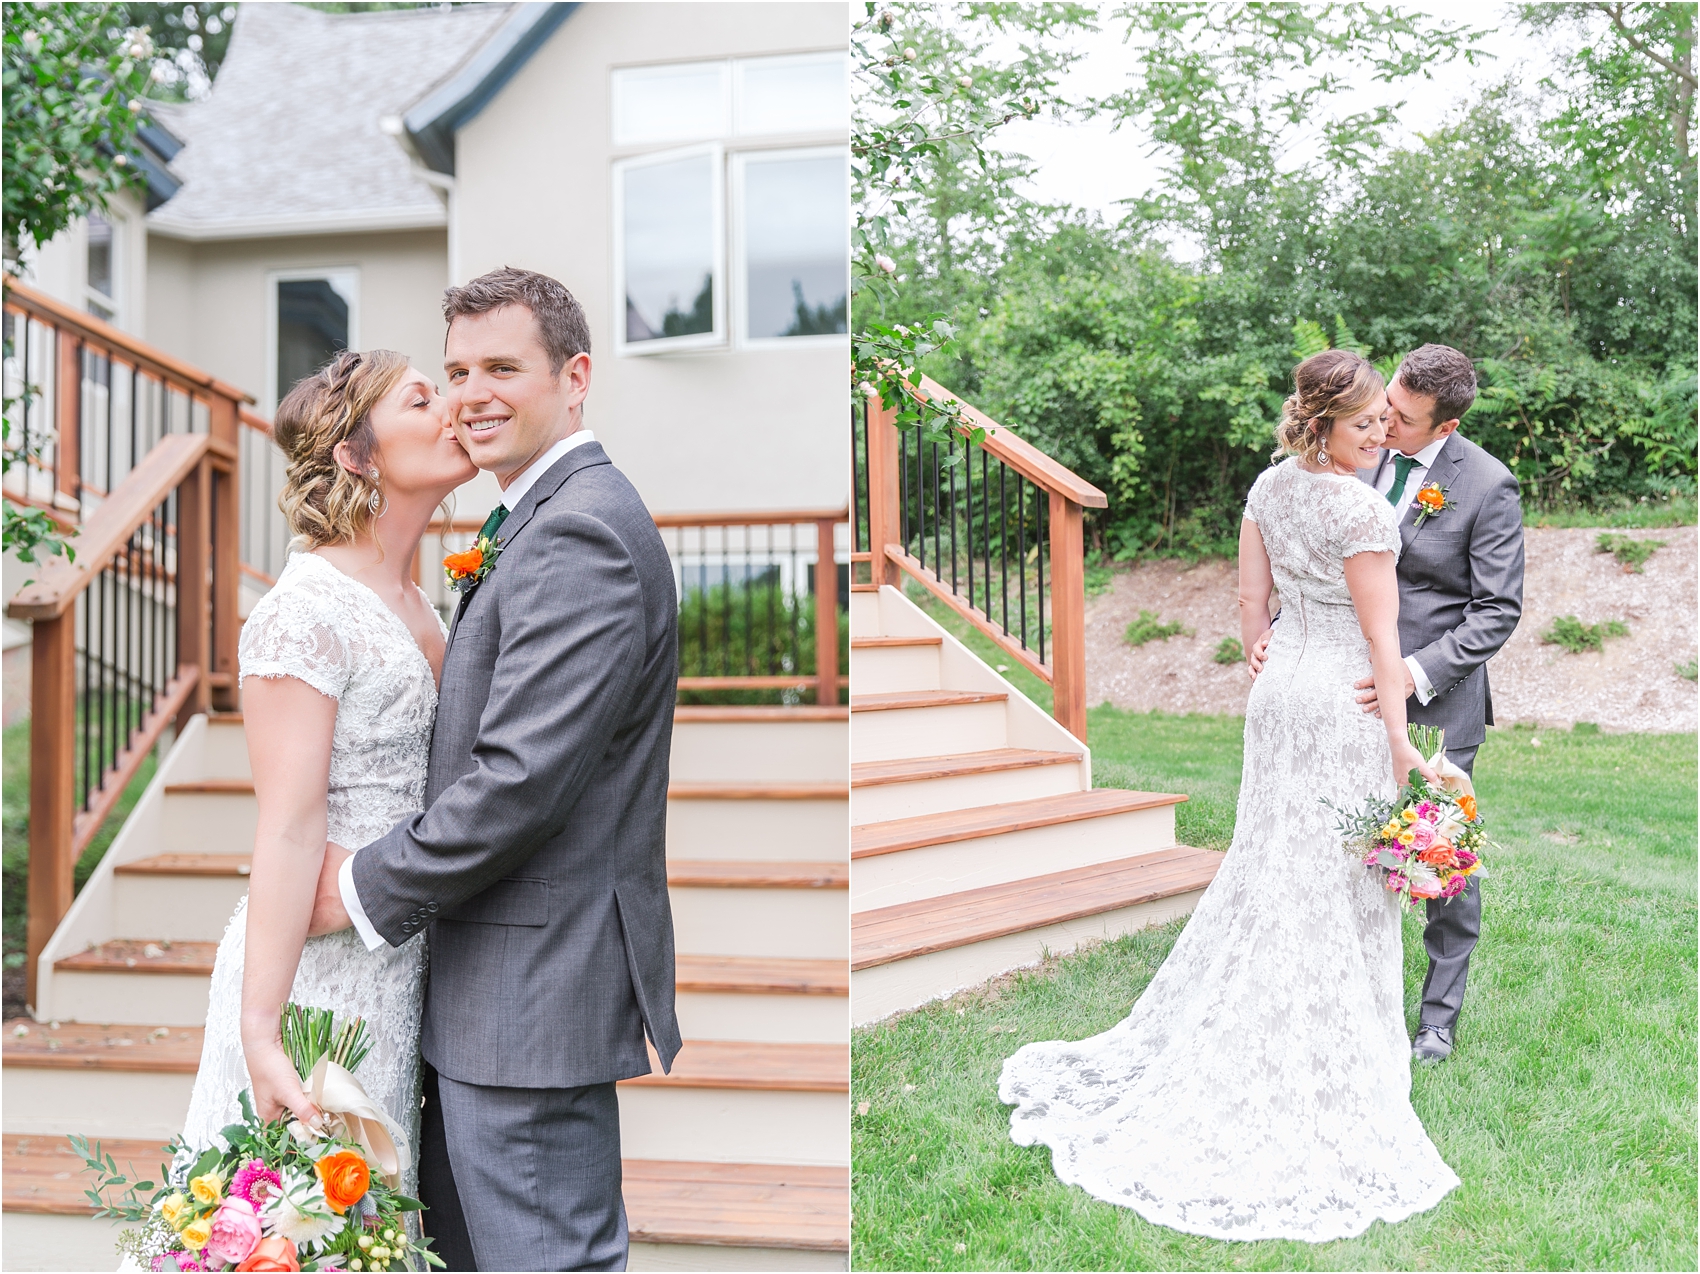 romantic-intimate-backyard-wedding-photos-at-private-estate-in-ann-arbor-mi-by-courtney-carolyn-photography_0038.jpg